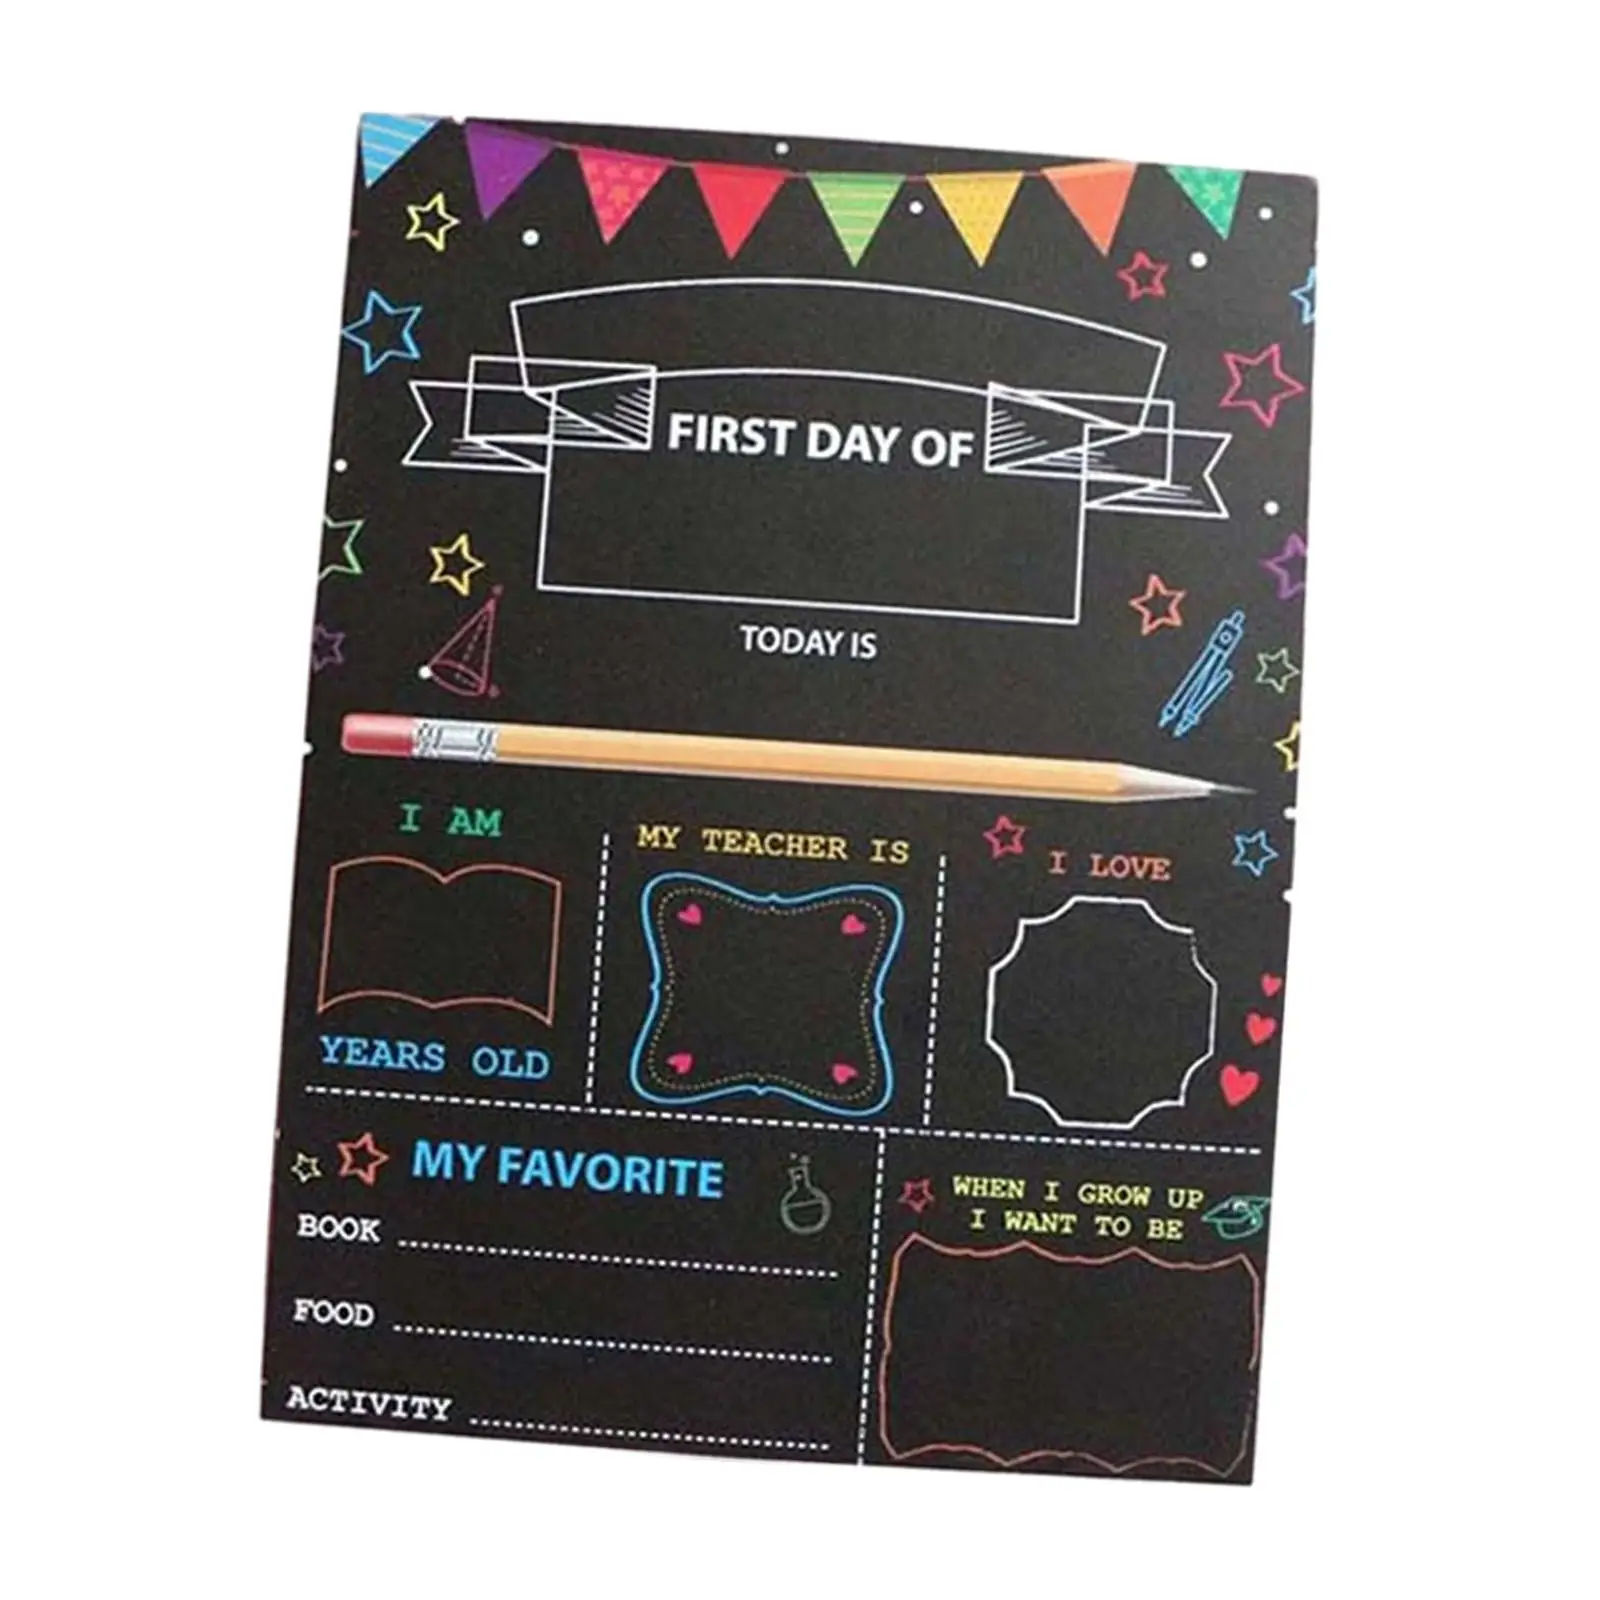 First Day of School Board Sign Double Sided 30.5x22.5cm Easy to Clean Portable Office Reception Nursery Milestone Chalkboard